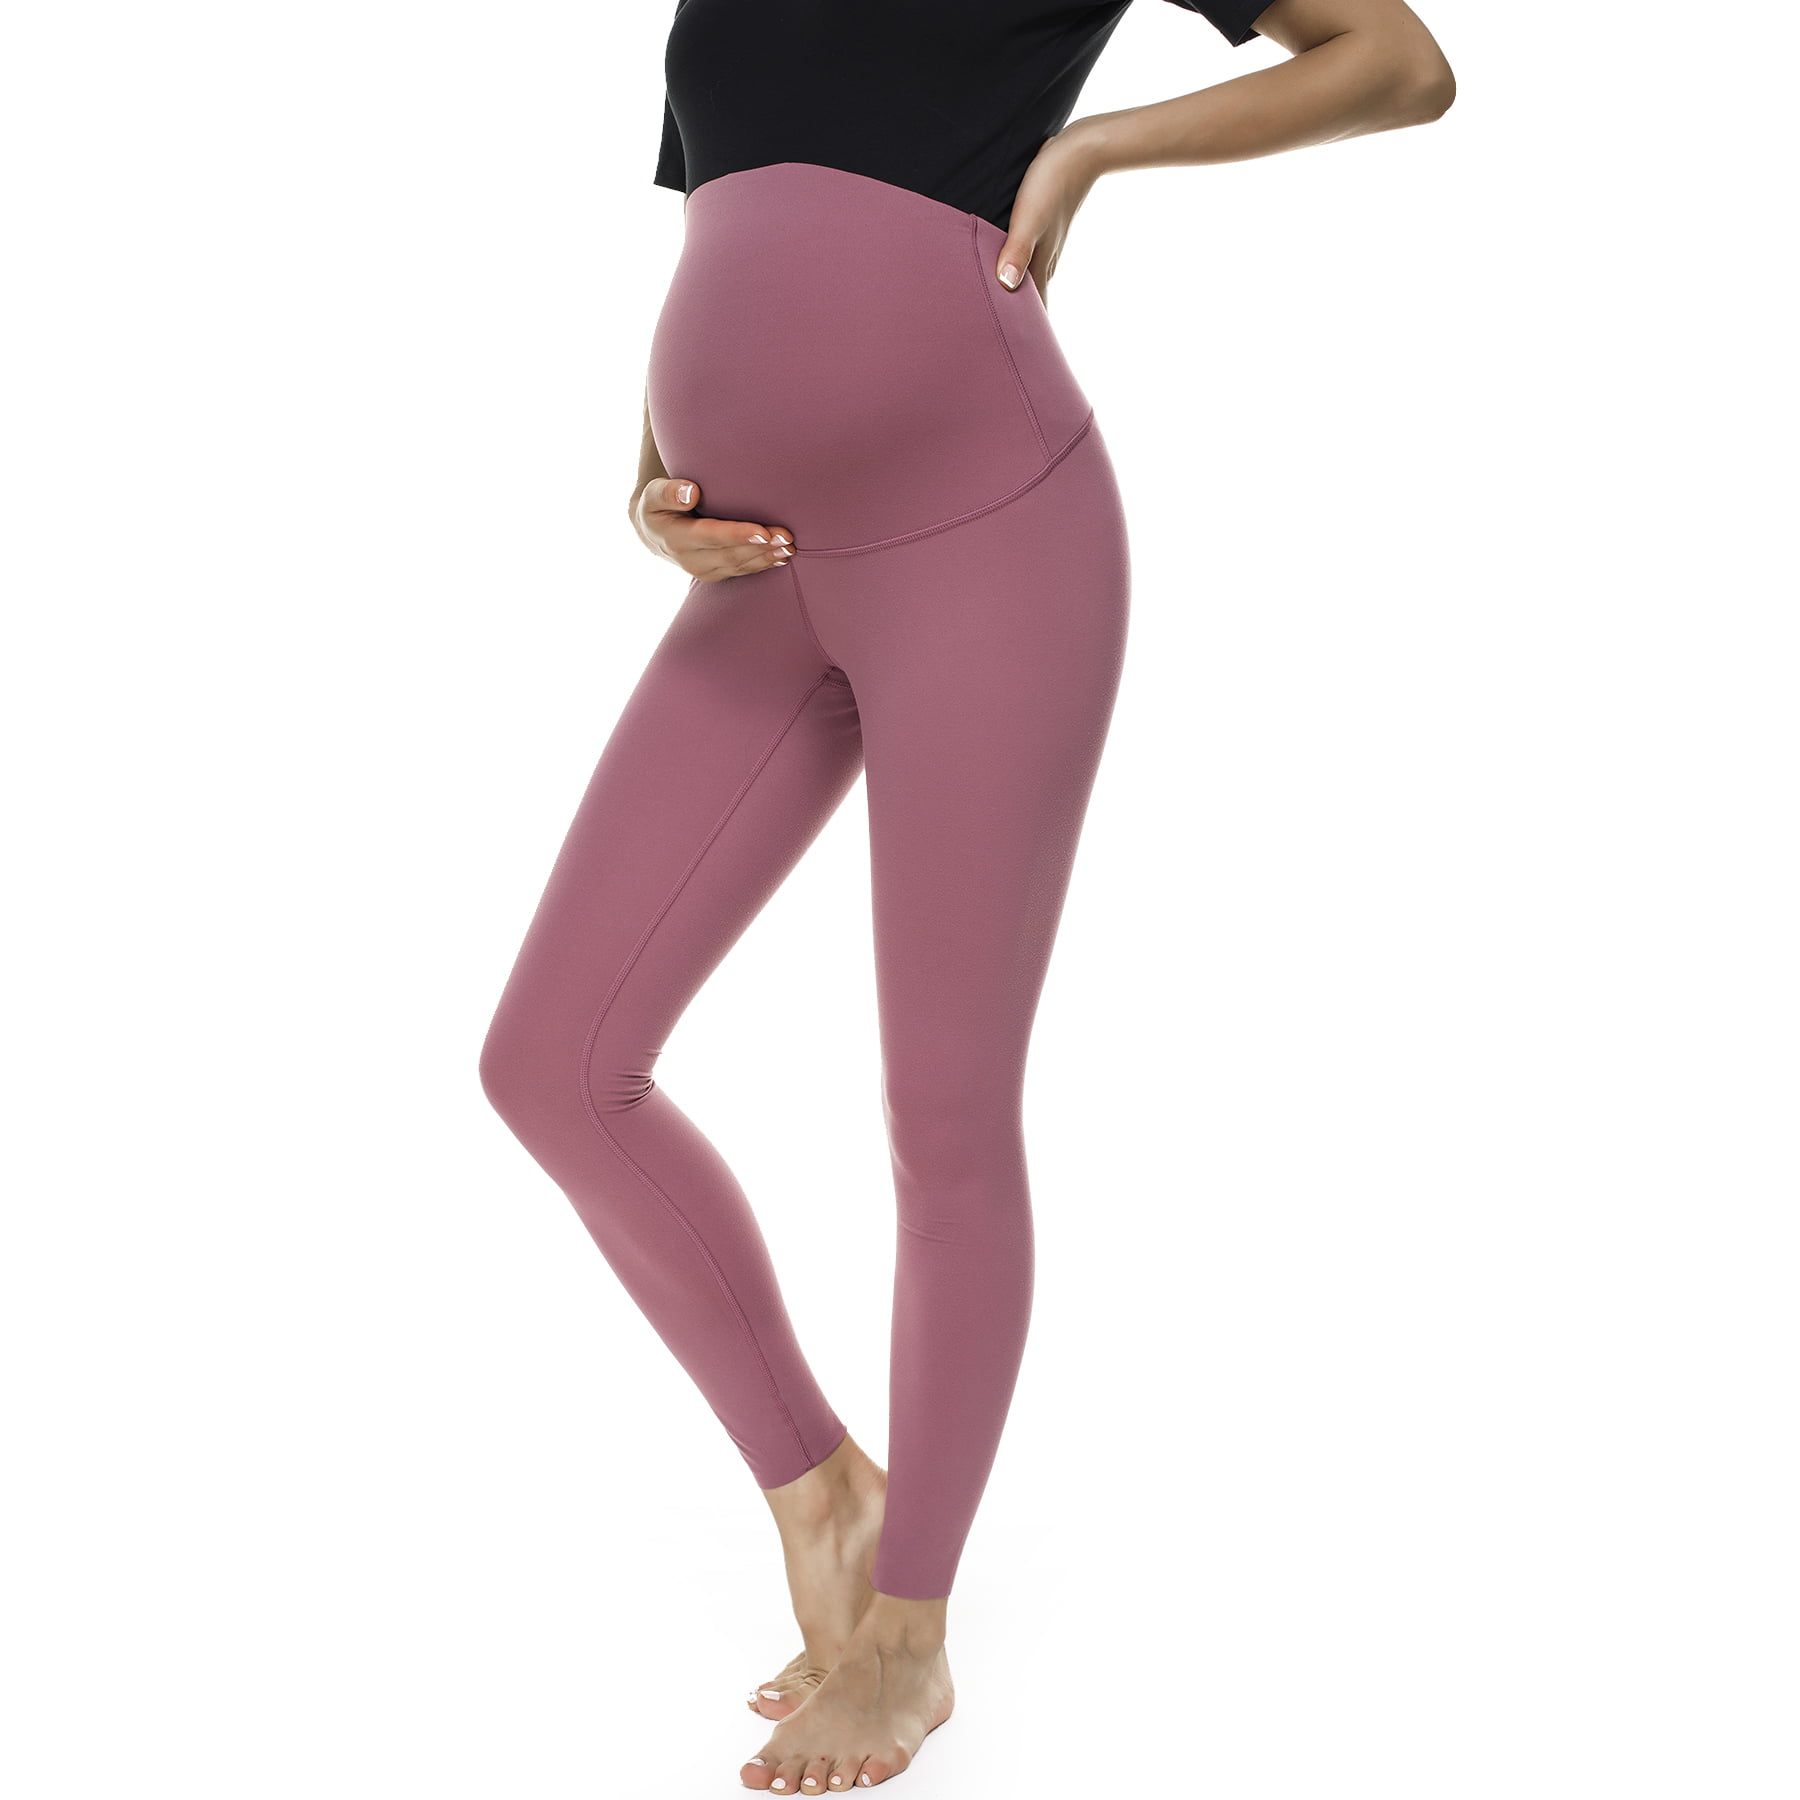 Maternity Tights Activewear Leggings Gym Clothes Jeggings Pants Stretch Nursing Clothes 